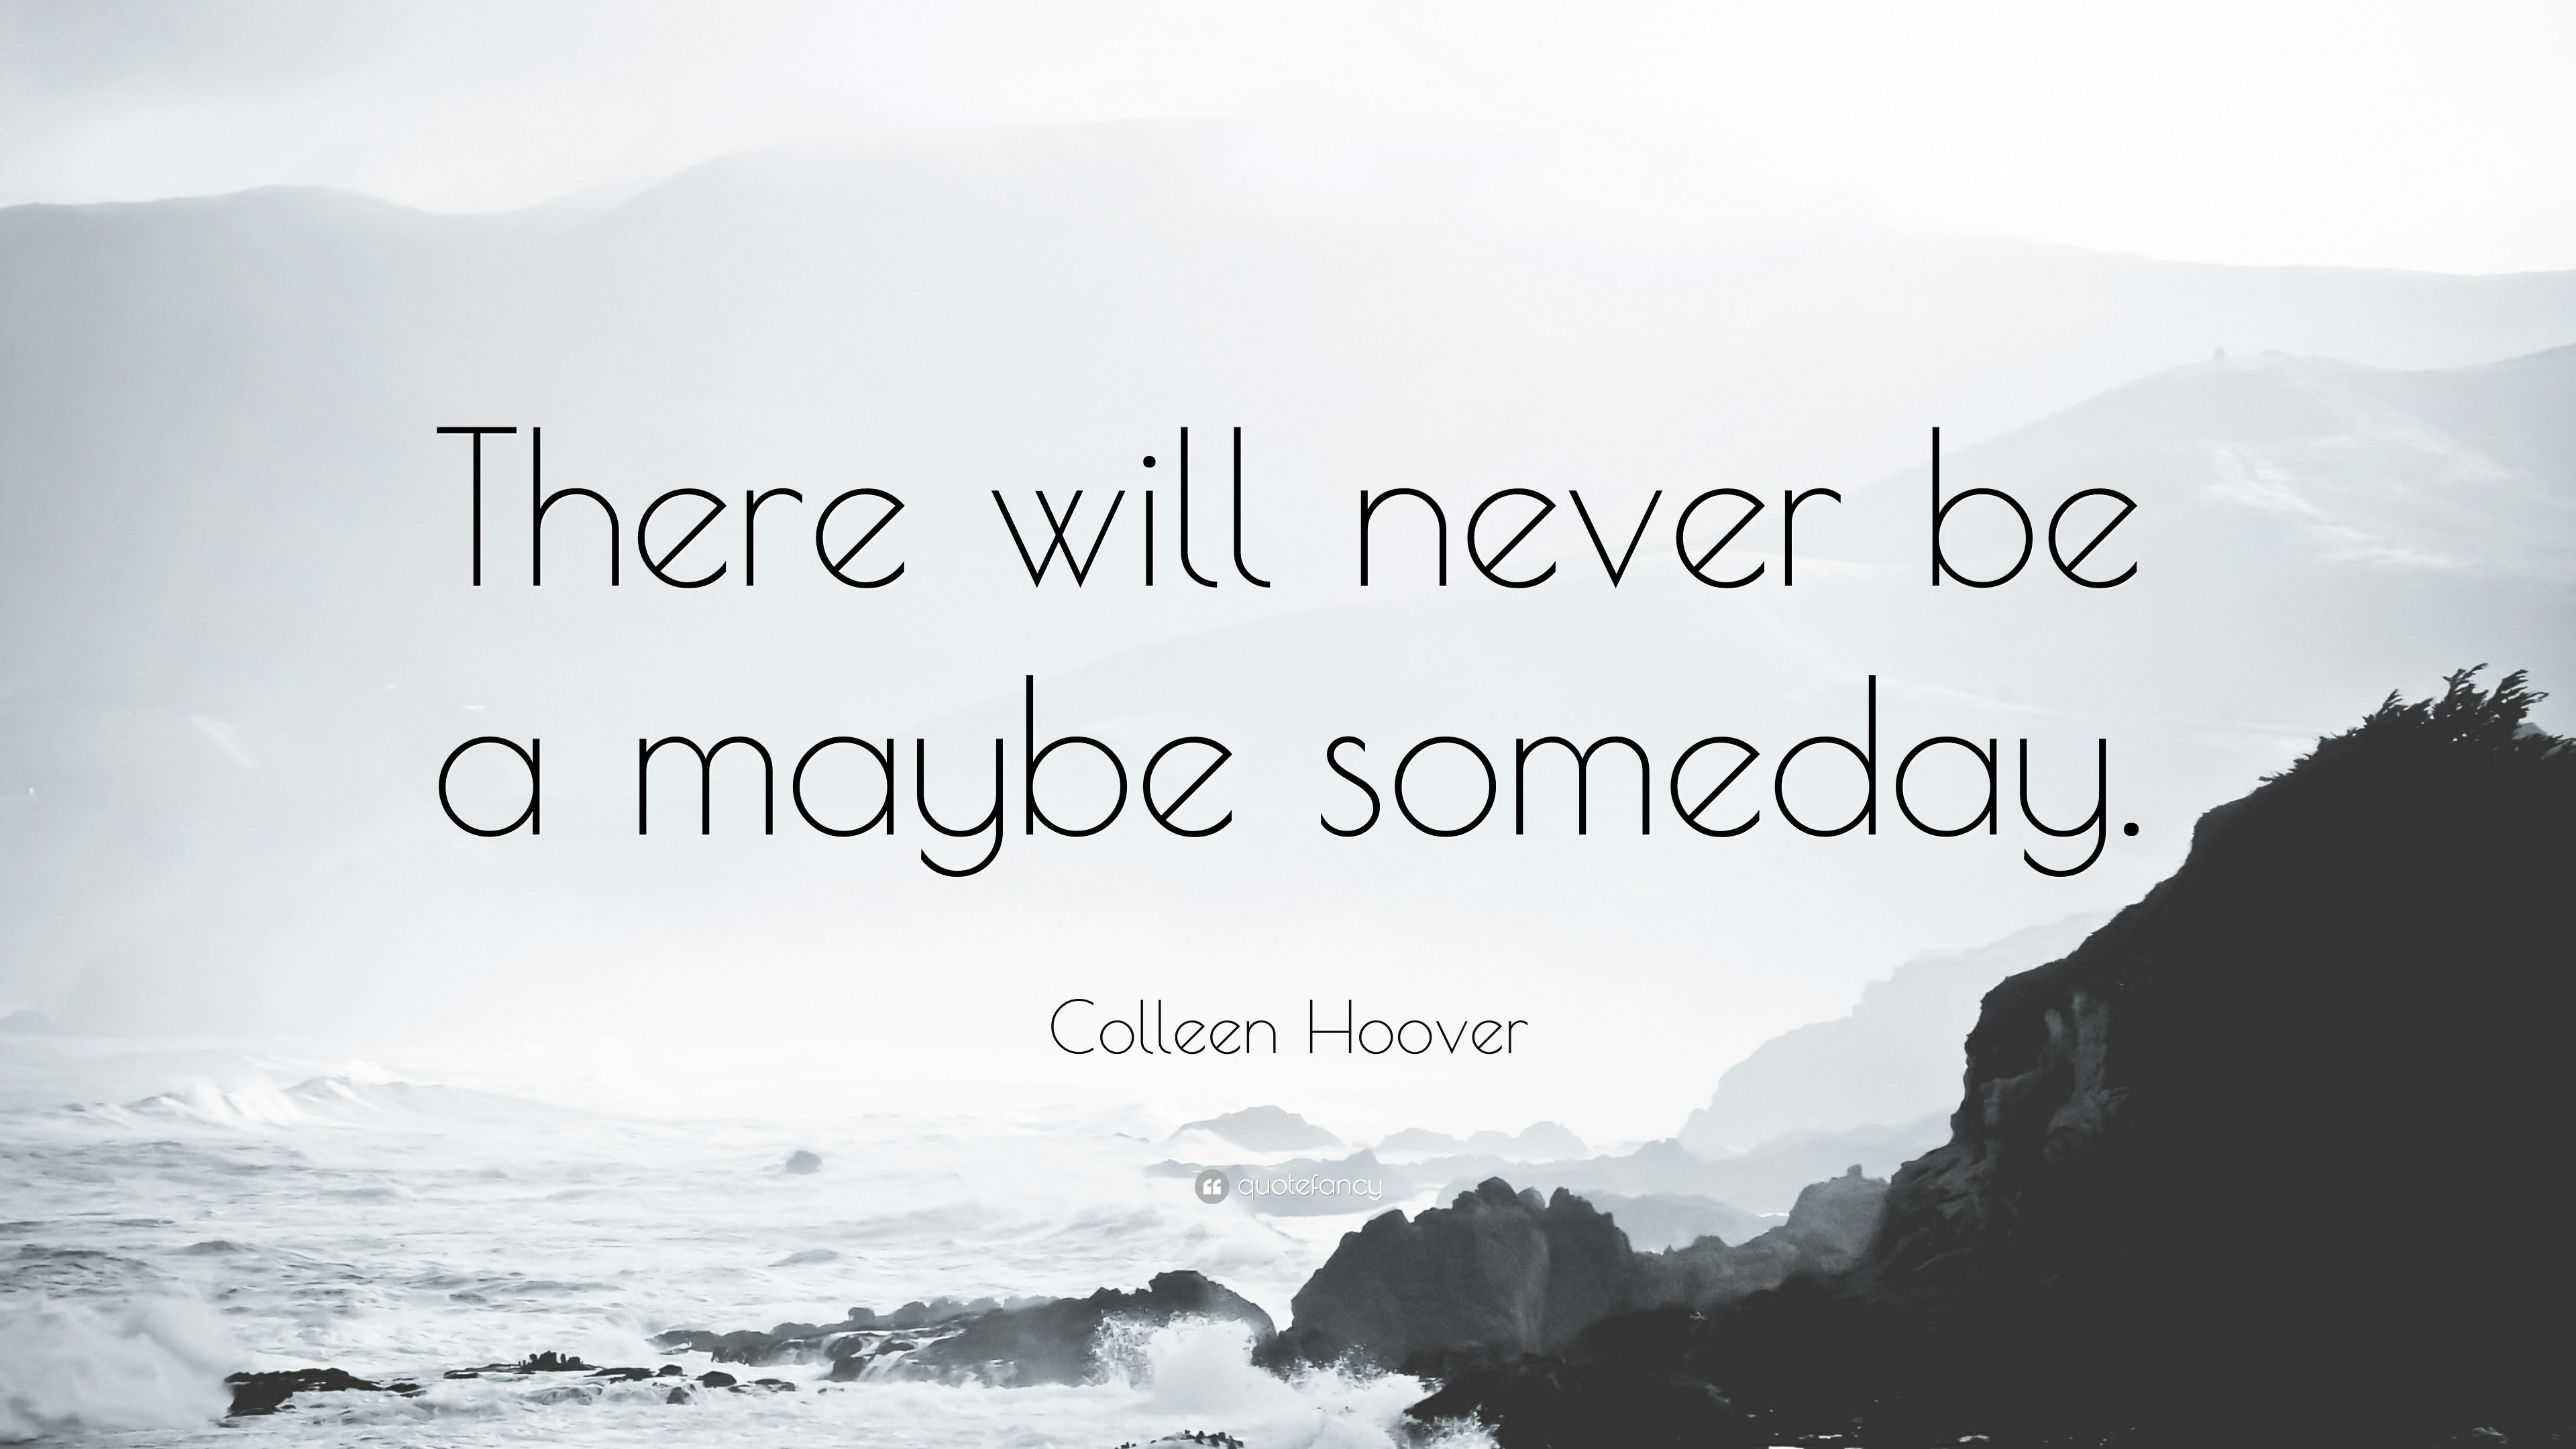 maybe someday by colleen hoover